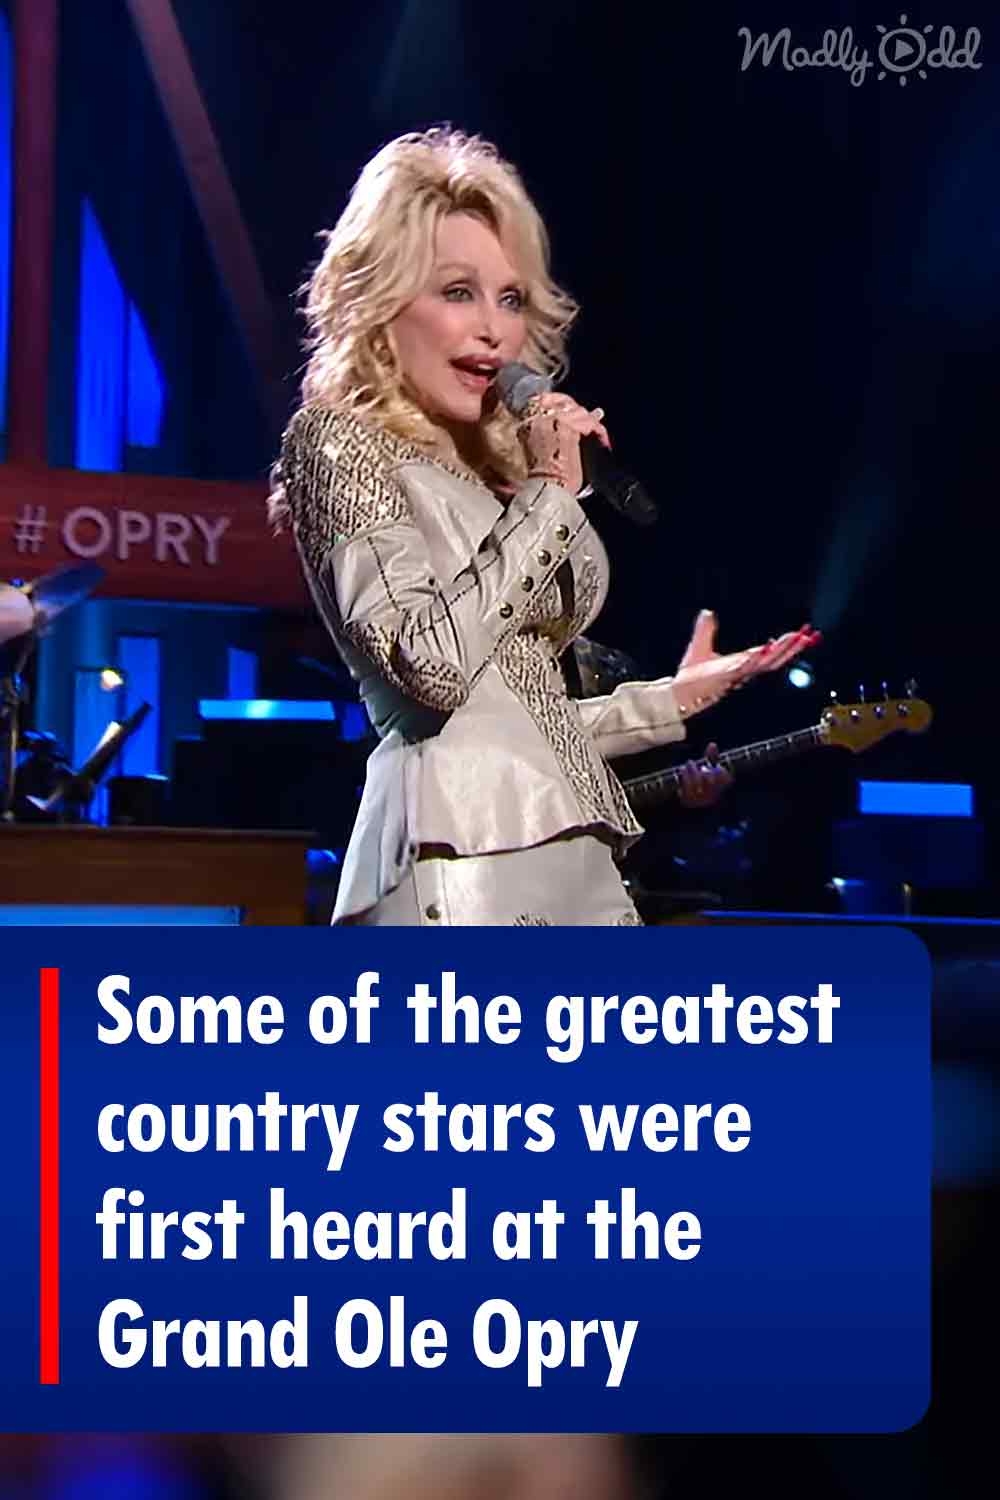 Some of the greatest country stars were first heard at the Grand Ole Opry